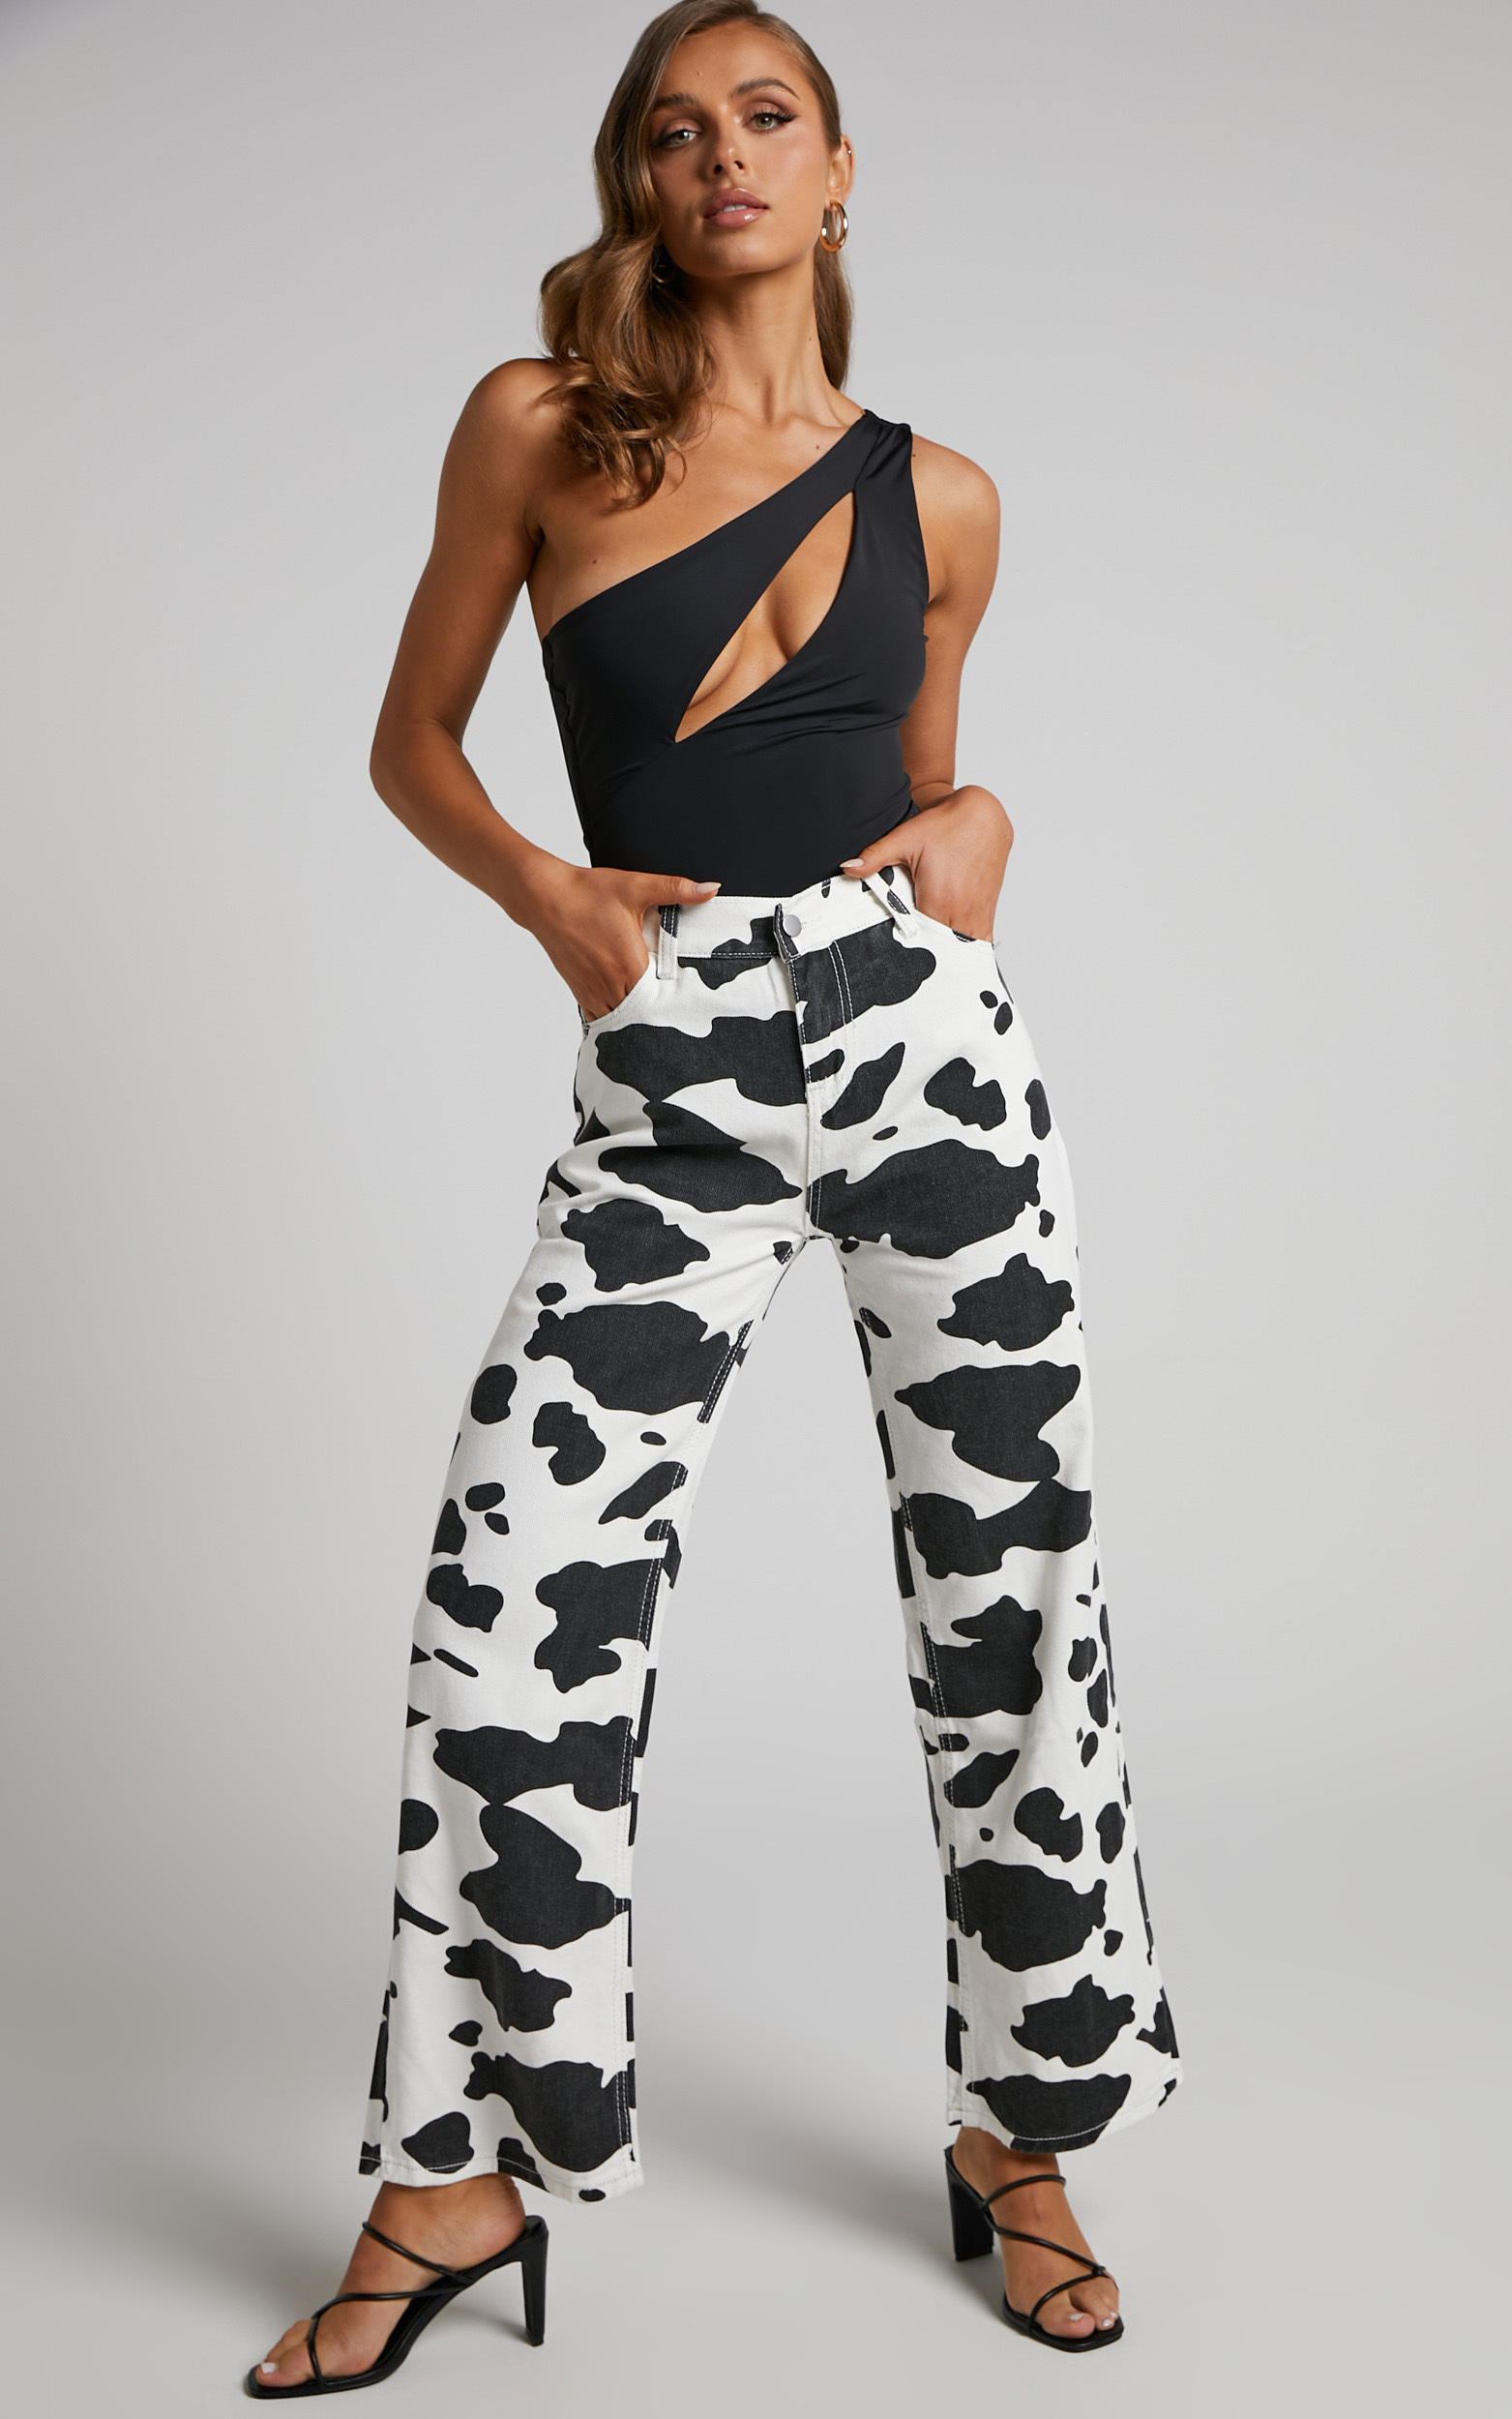 Trianky Pants - Cow Print High Waist Straight Leg Pants in Black/White - L, BLK1, hi-res image number null